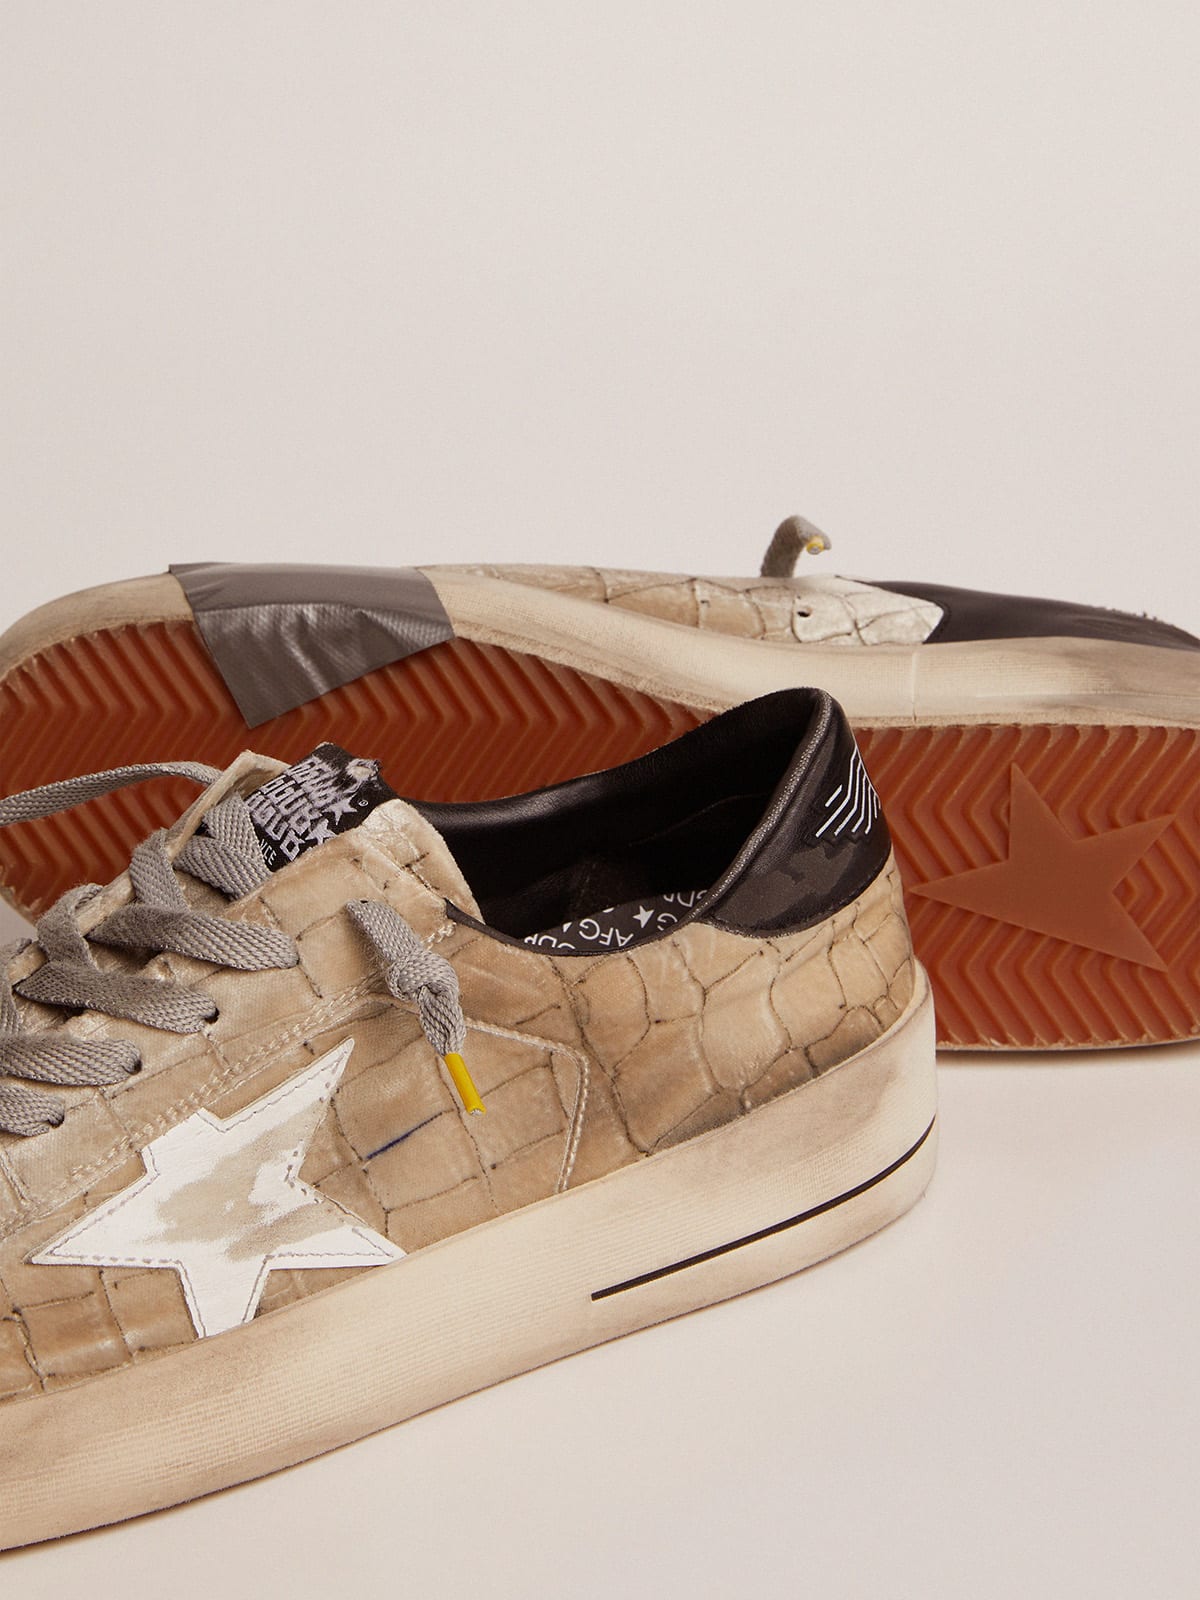 Golden Goose - Stardan LAB sneakers with silver velvet upper and crocodile print in 